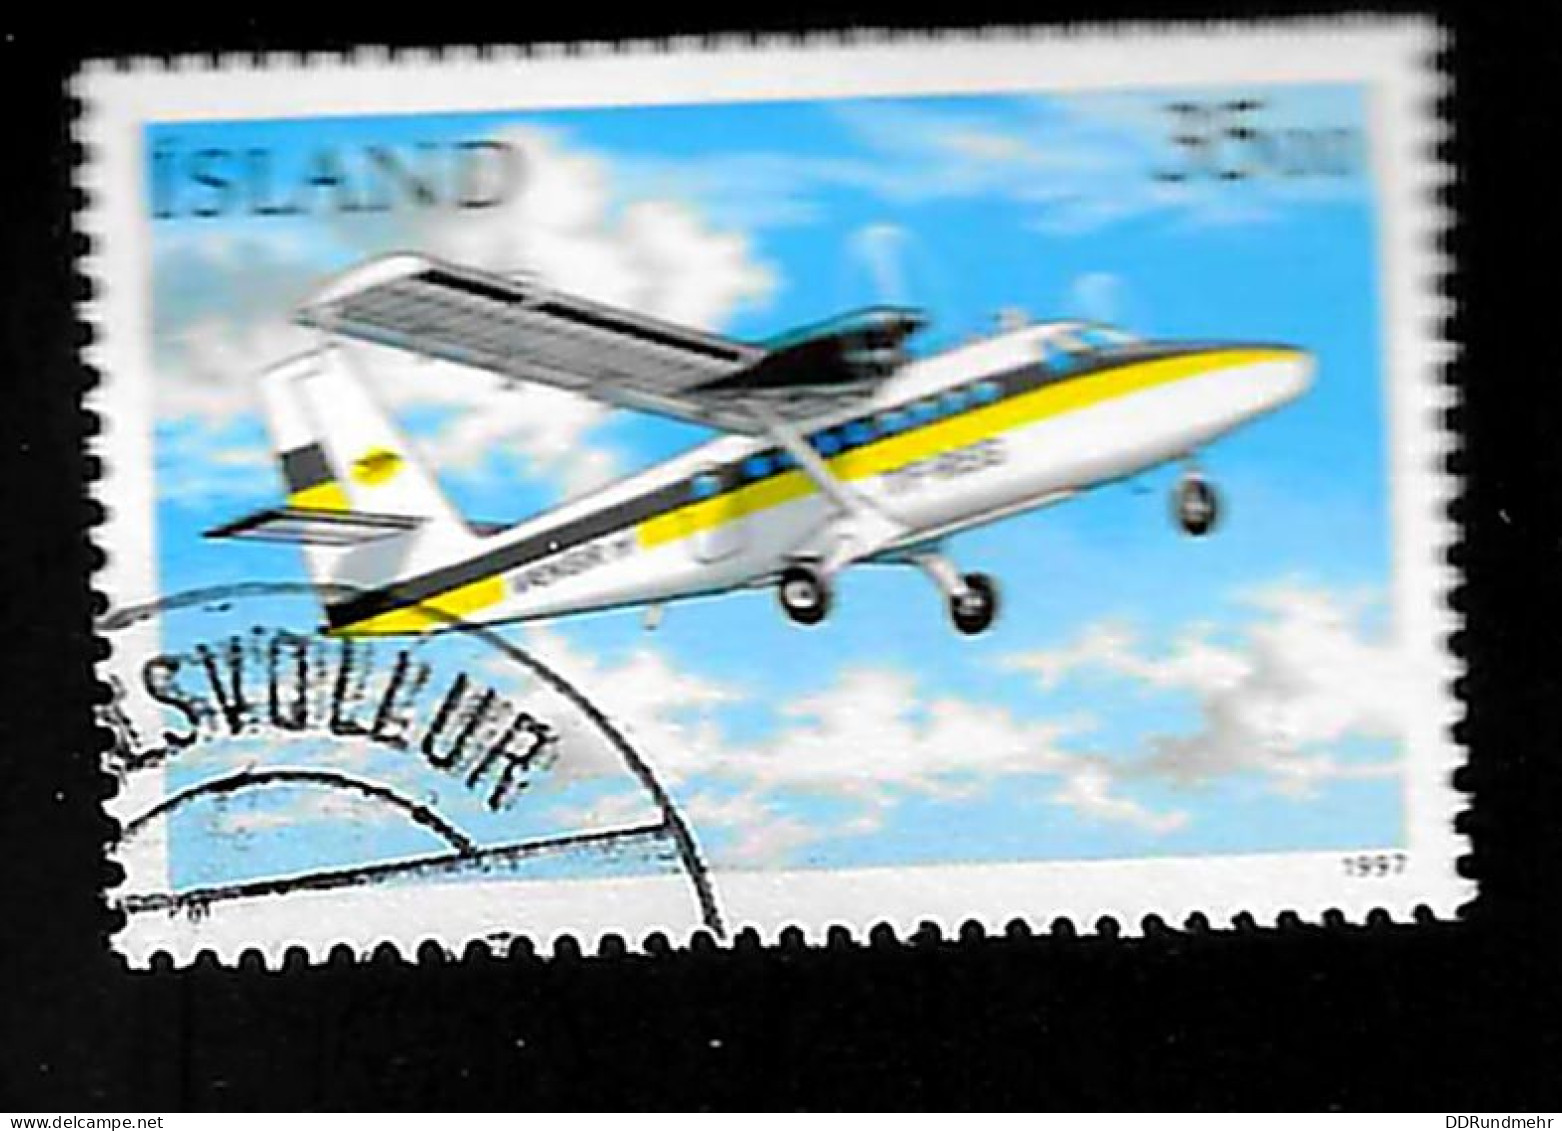 1997 Postal Aircrafts Michel IS 869 Stamp Number IS 841 Stanley Gibbons IS 882 AFA IS 854 Used - Gebraucht